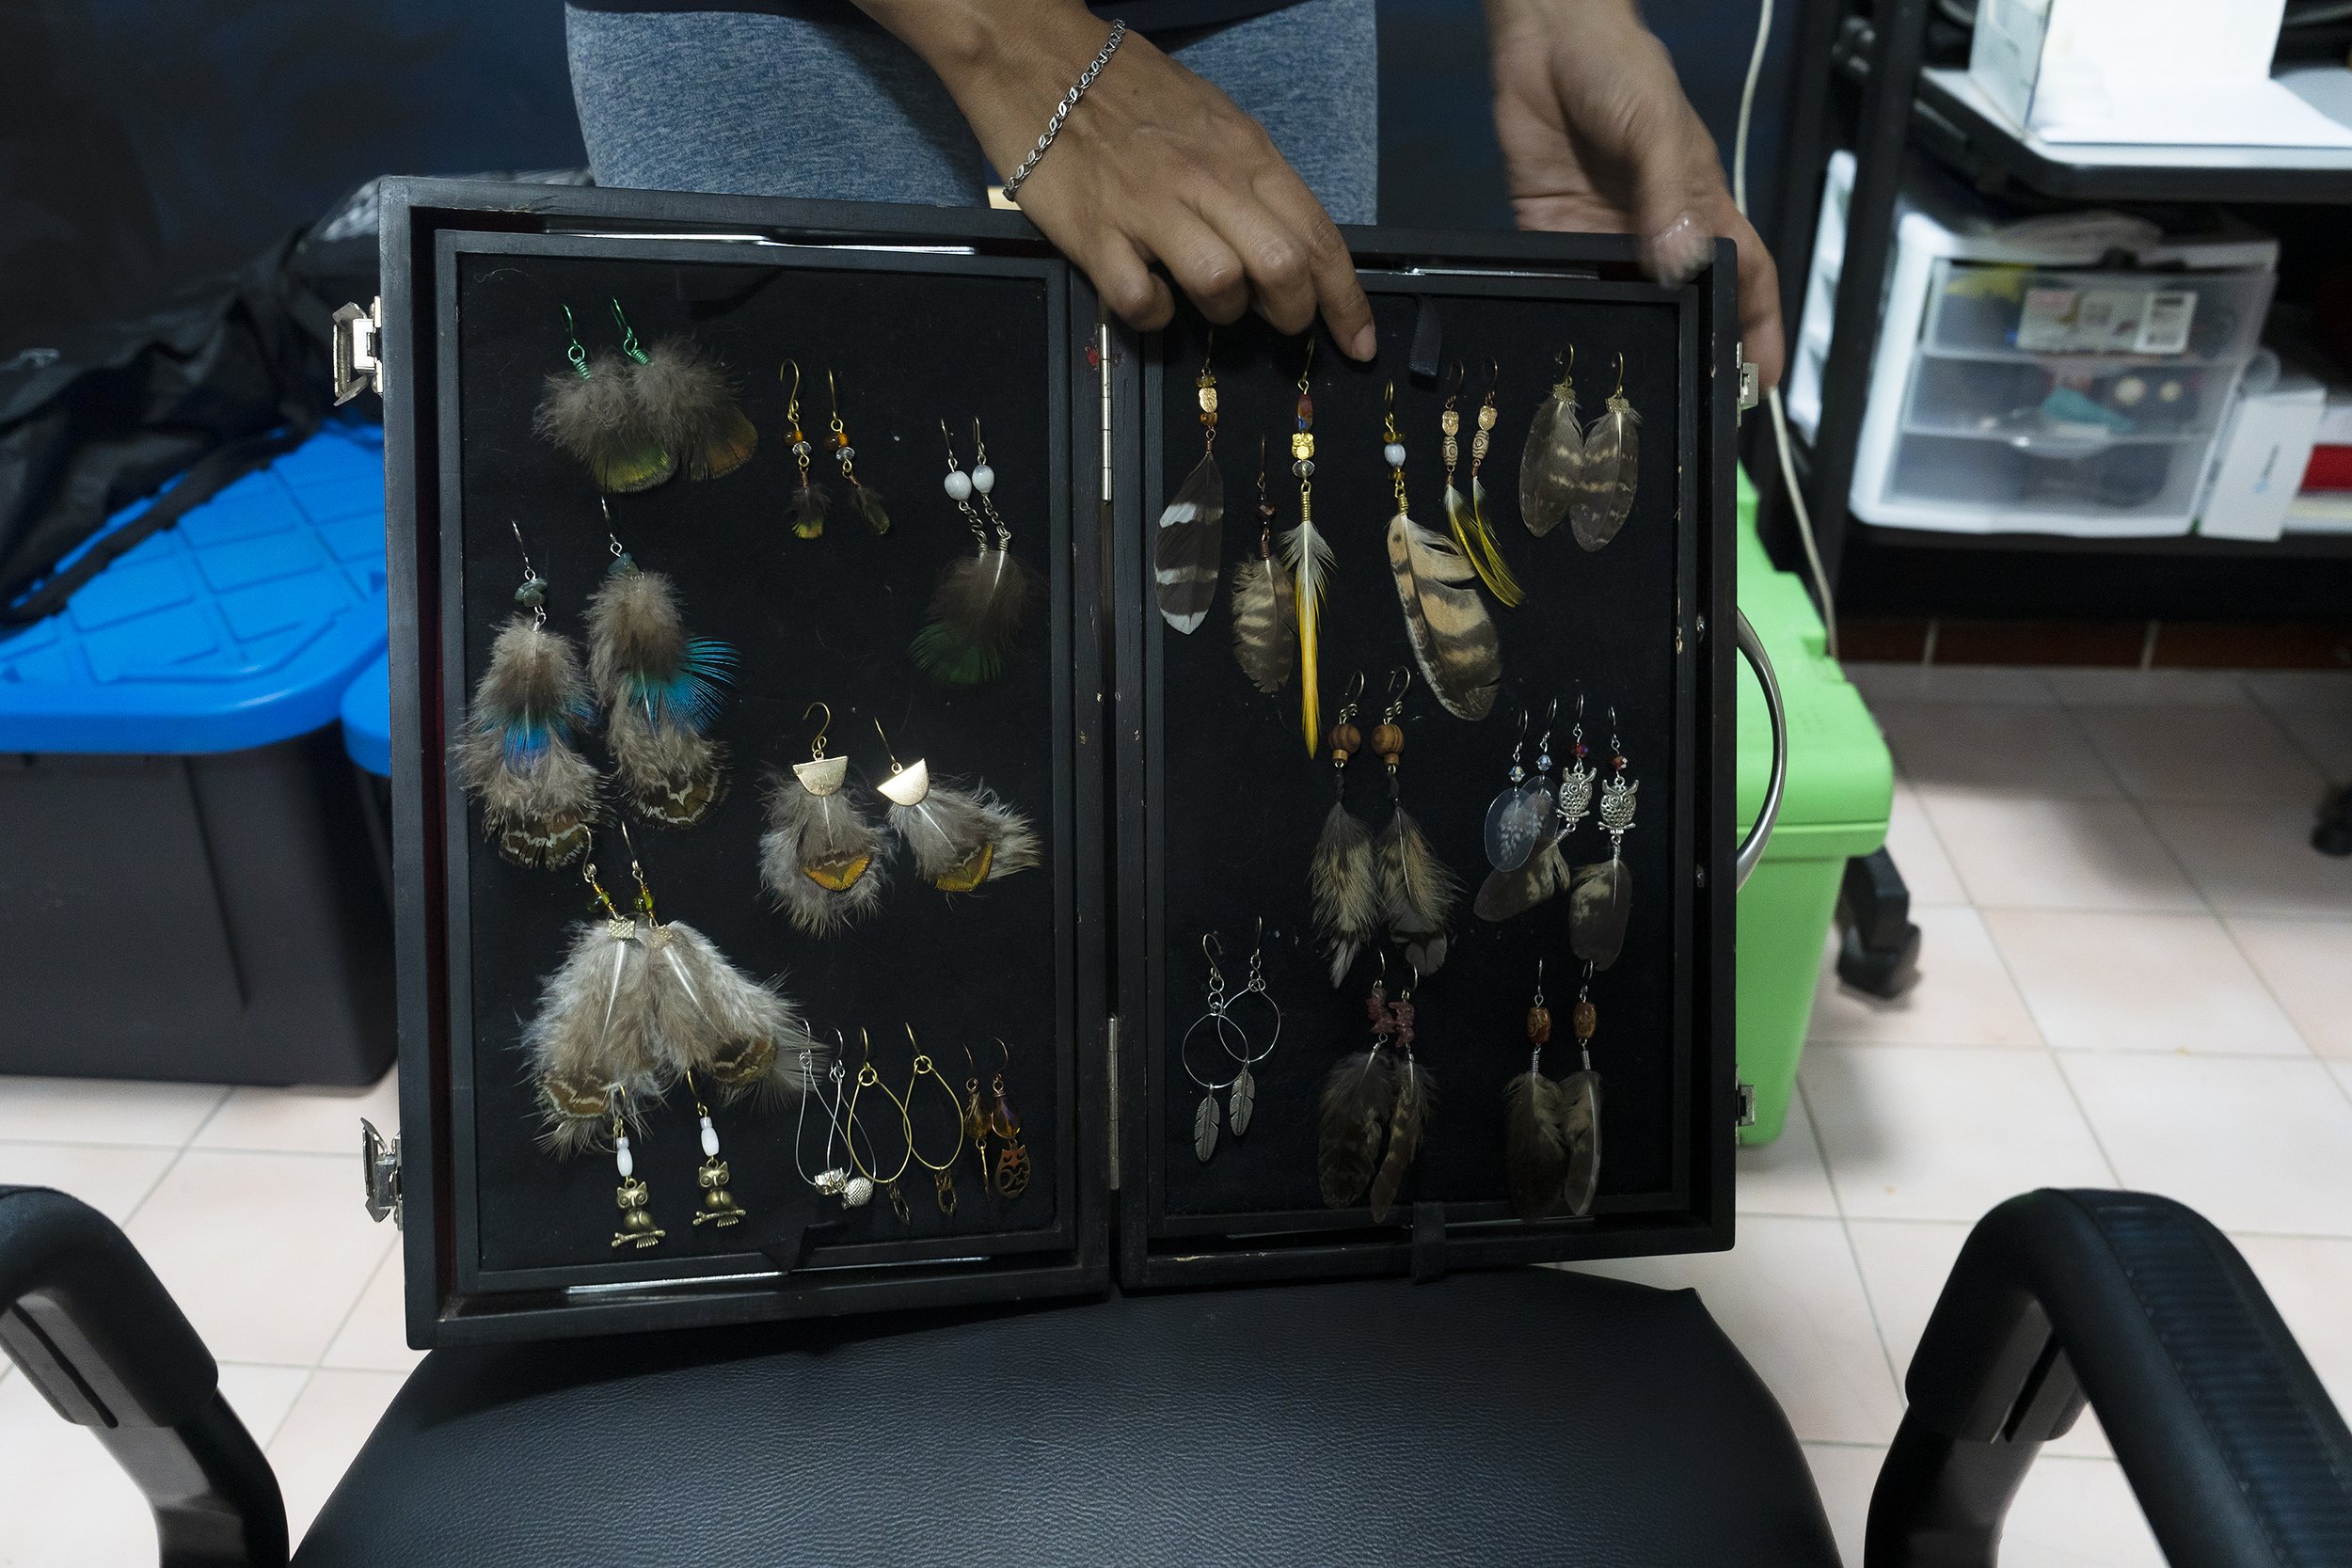 Jewelry made and sold by Diana and Alberto using molted feathers from the centre’s birds. This helps them fund the centre’s programs and care for the birds. Tamara Blazquez Haik.